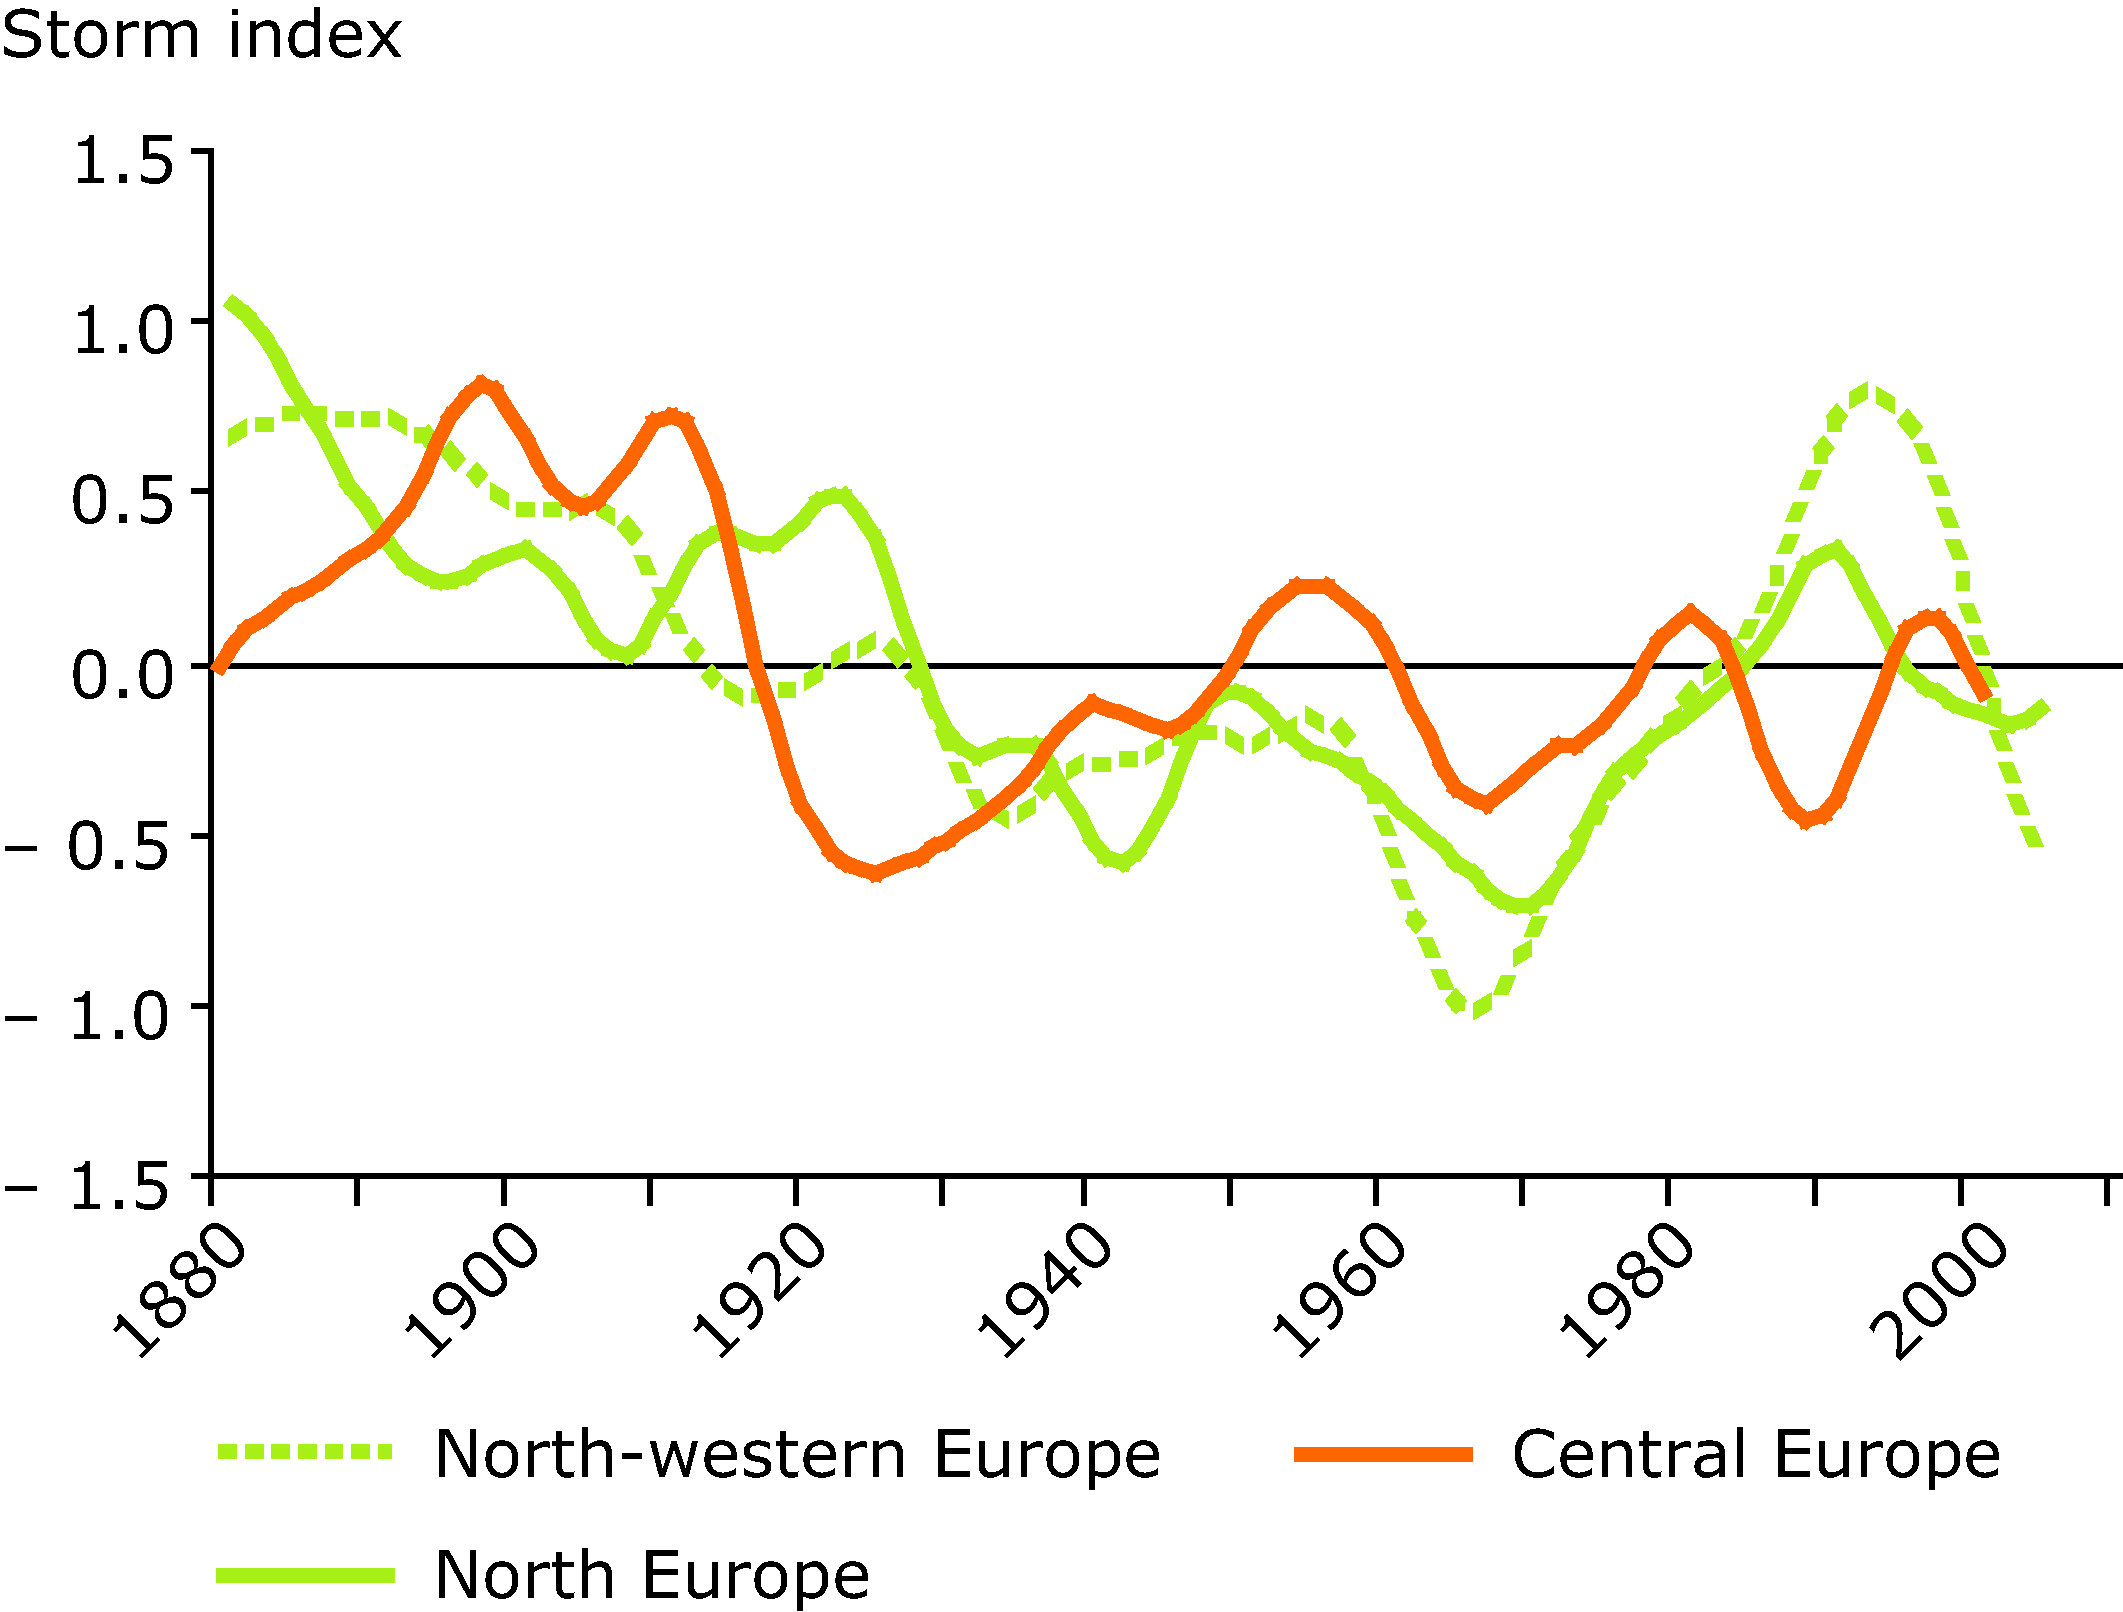 Storm index for various parts of Europe 1881-2005